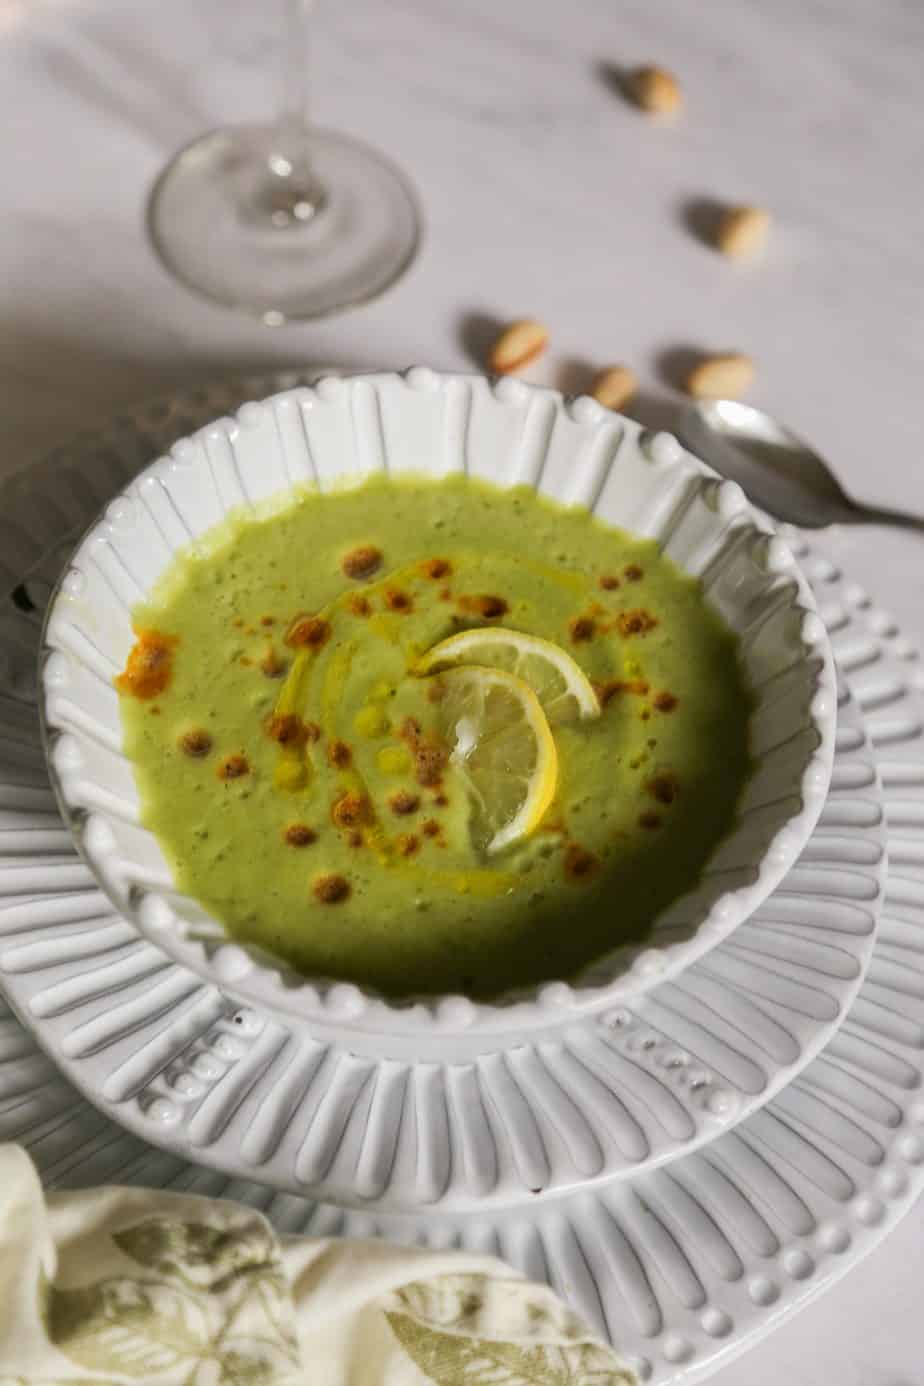 cold cucumber soup garnished with lemons in a white bowl on a white plate with a napkin